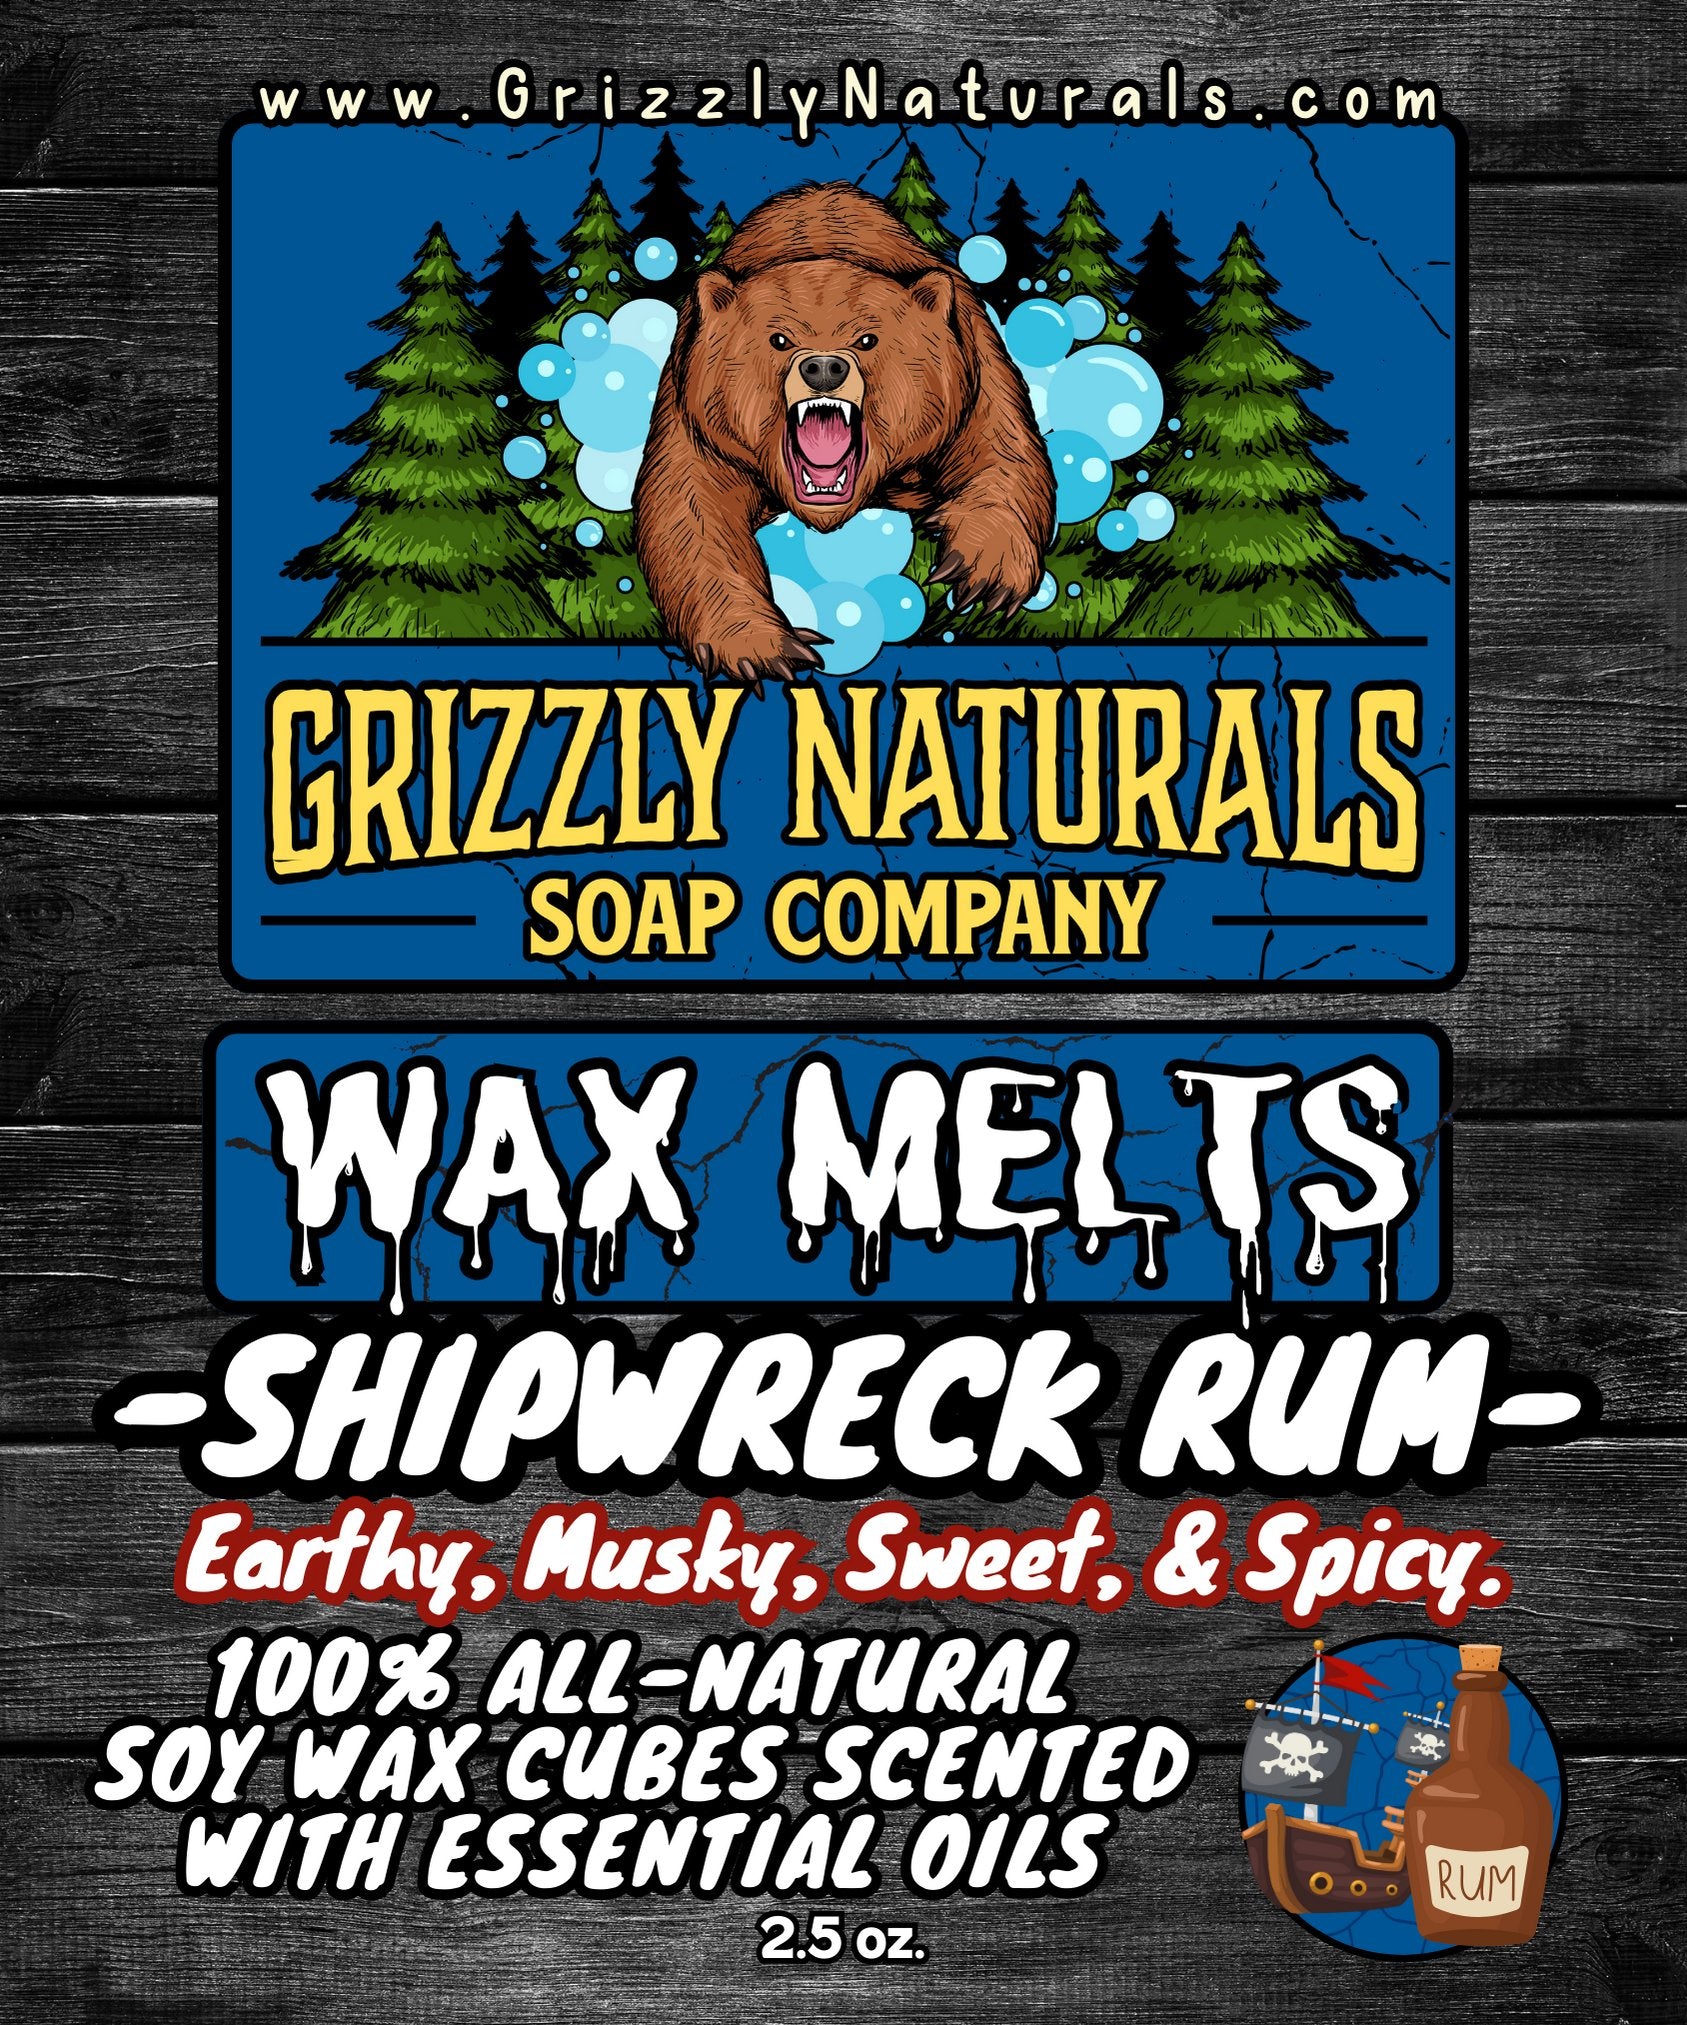 Shipwreck Rum Wax Melts 🏴‍☠️🦜 - Grizzly Naturals Soap Company